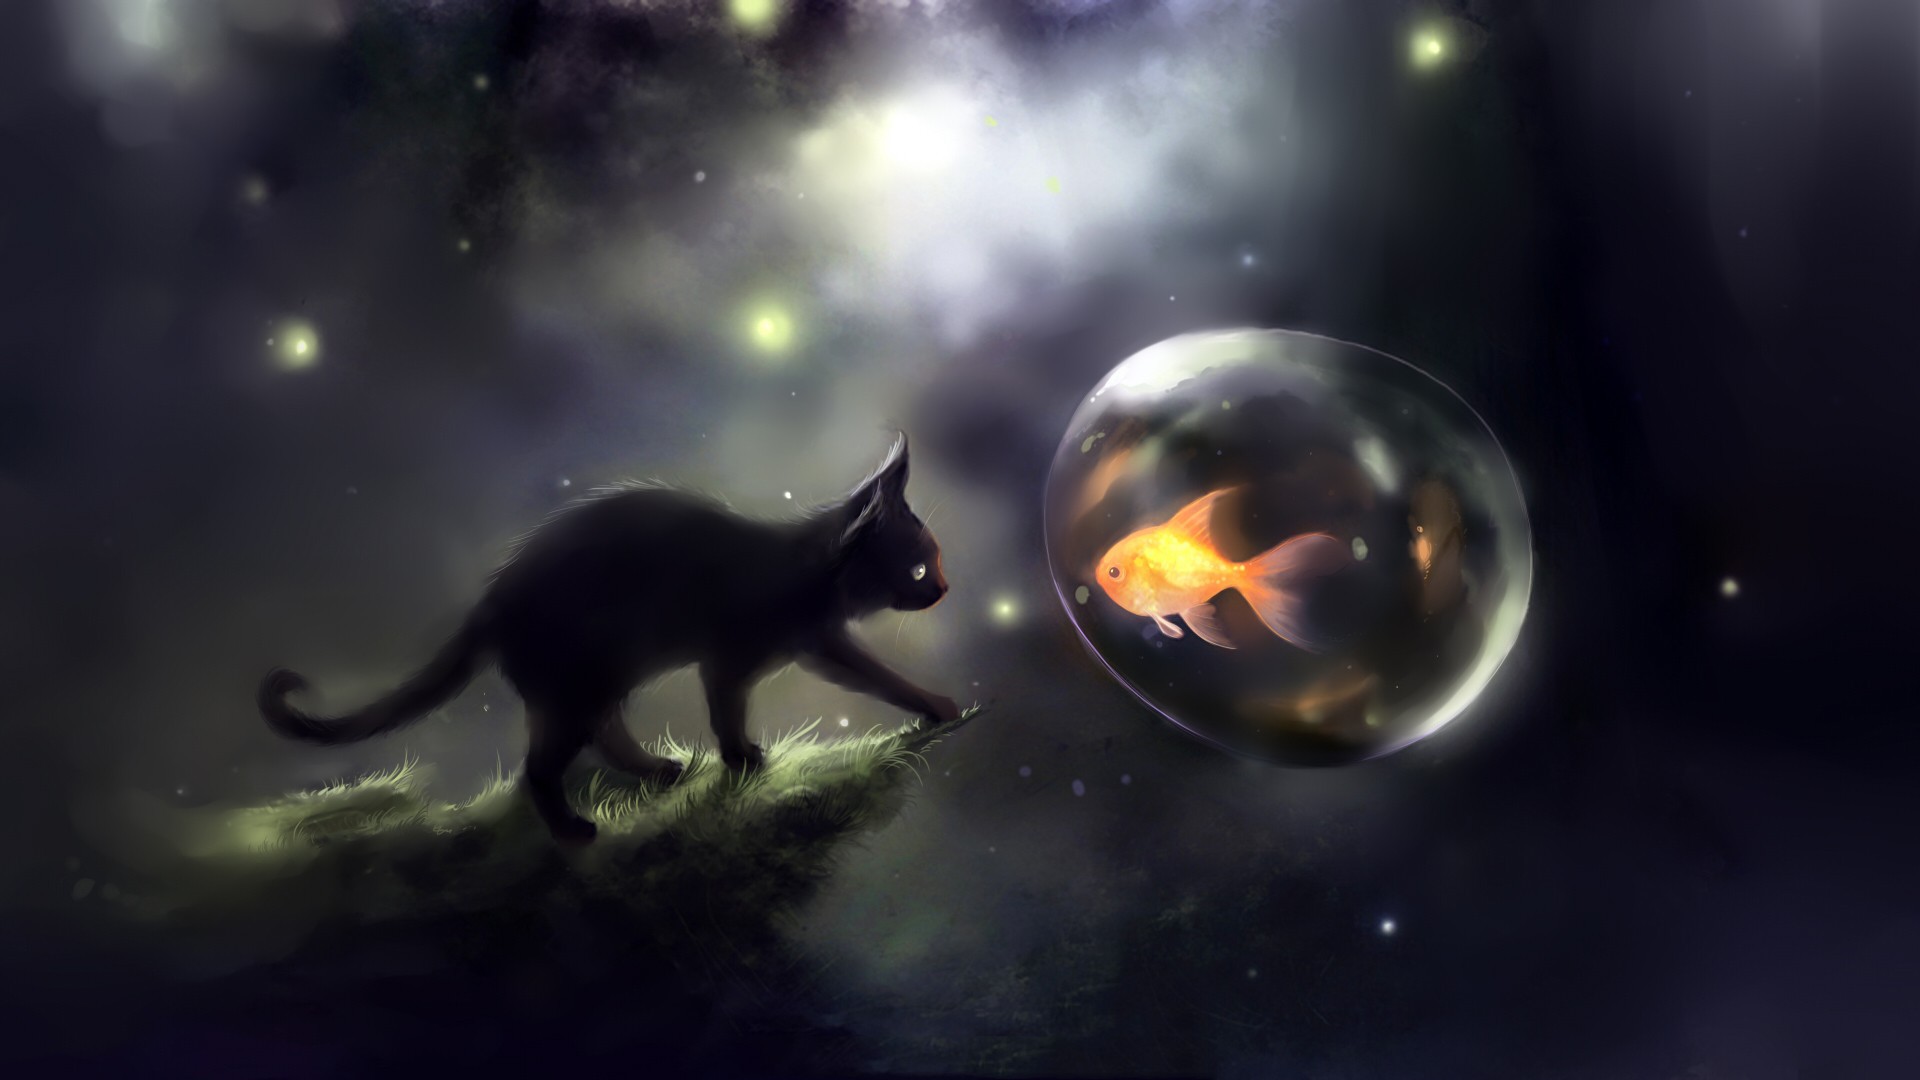 Black cat and goldfish, art wallpapers and images ...